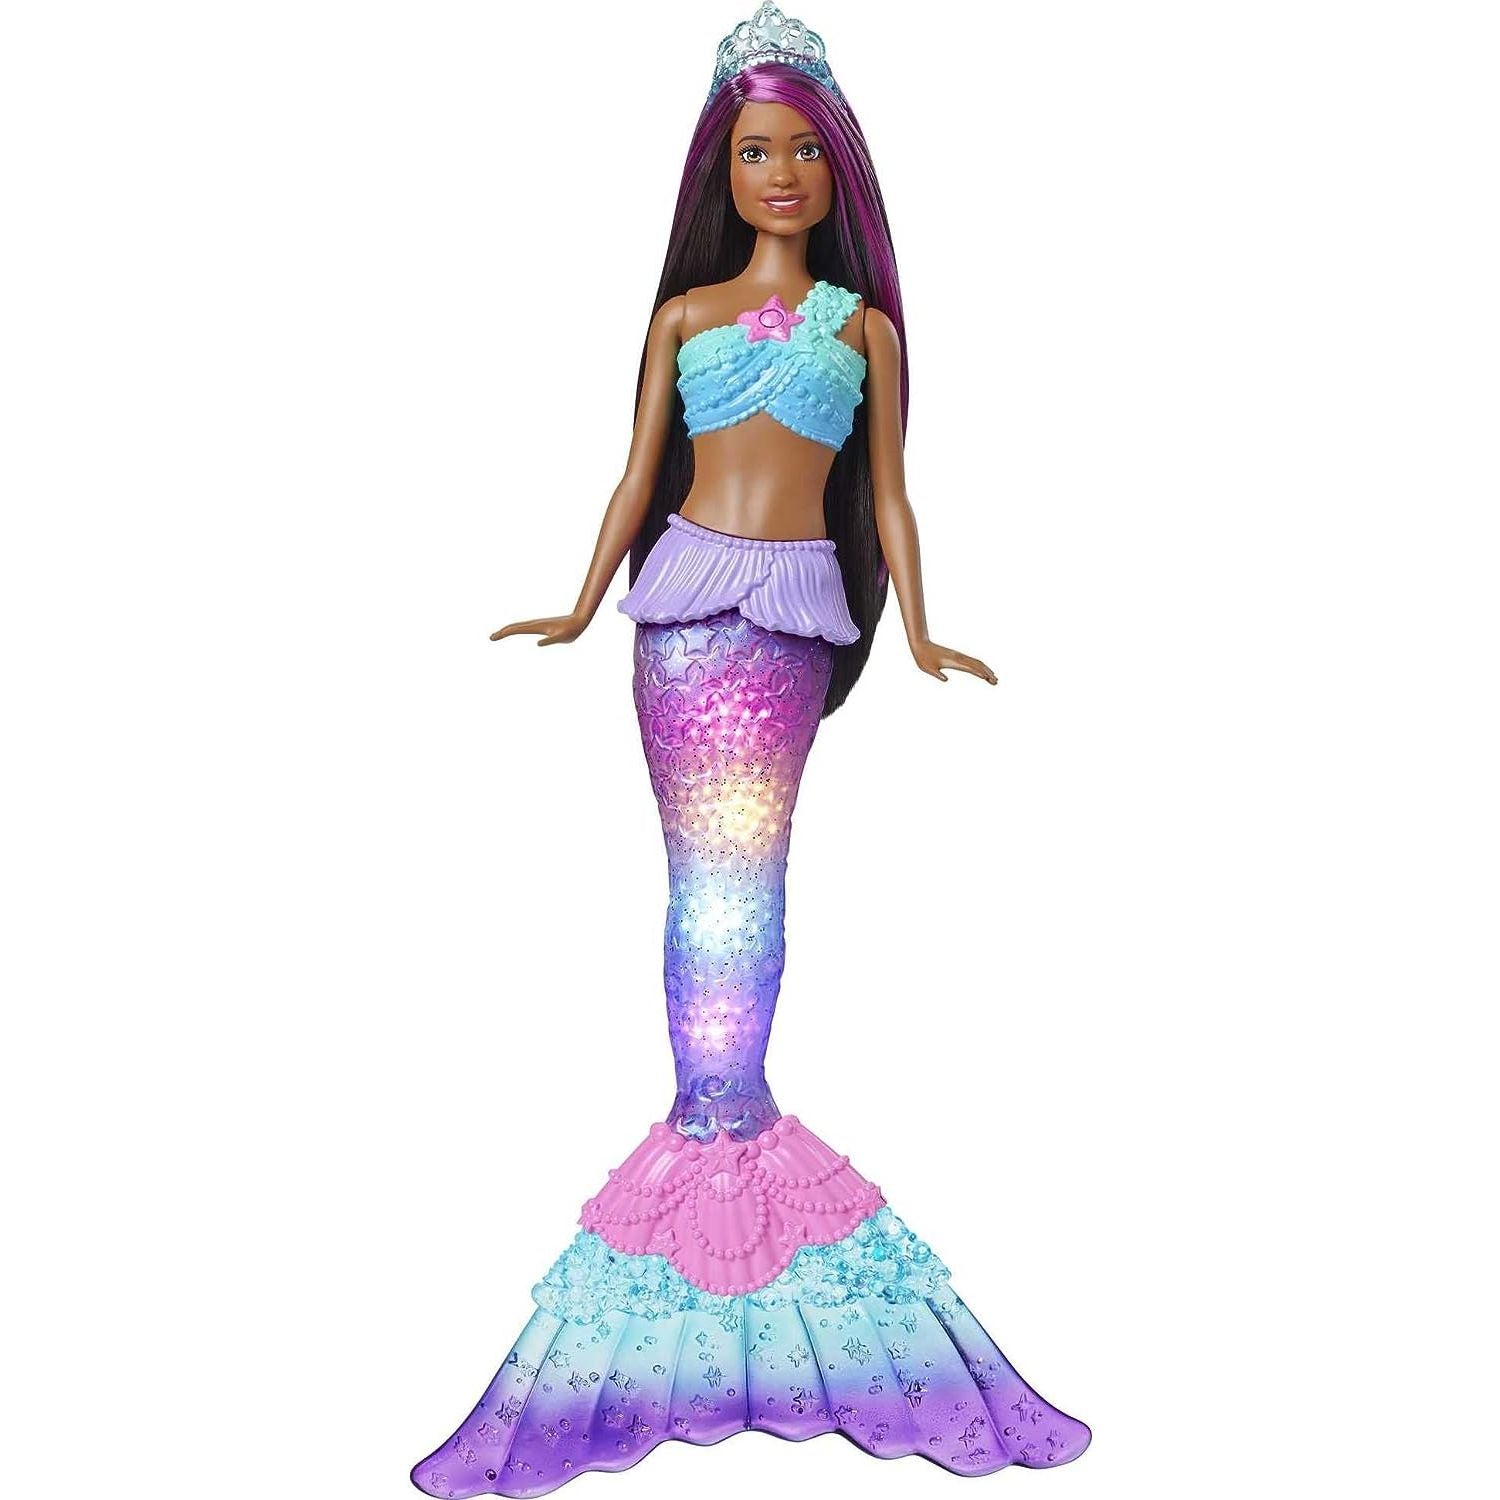 Barbie Dreamtopia Doll, Mermaid Toy with Water-Activated Light-Up Tail, Purple-Streaked Hair & 4 Colorful Light Shows